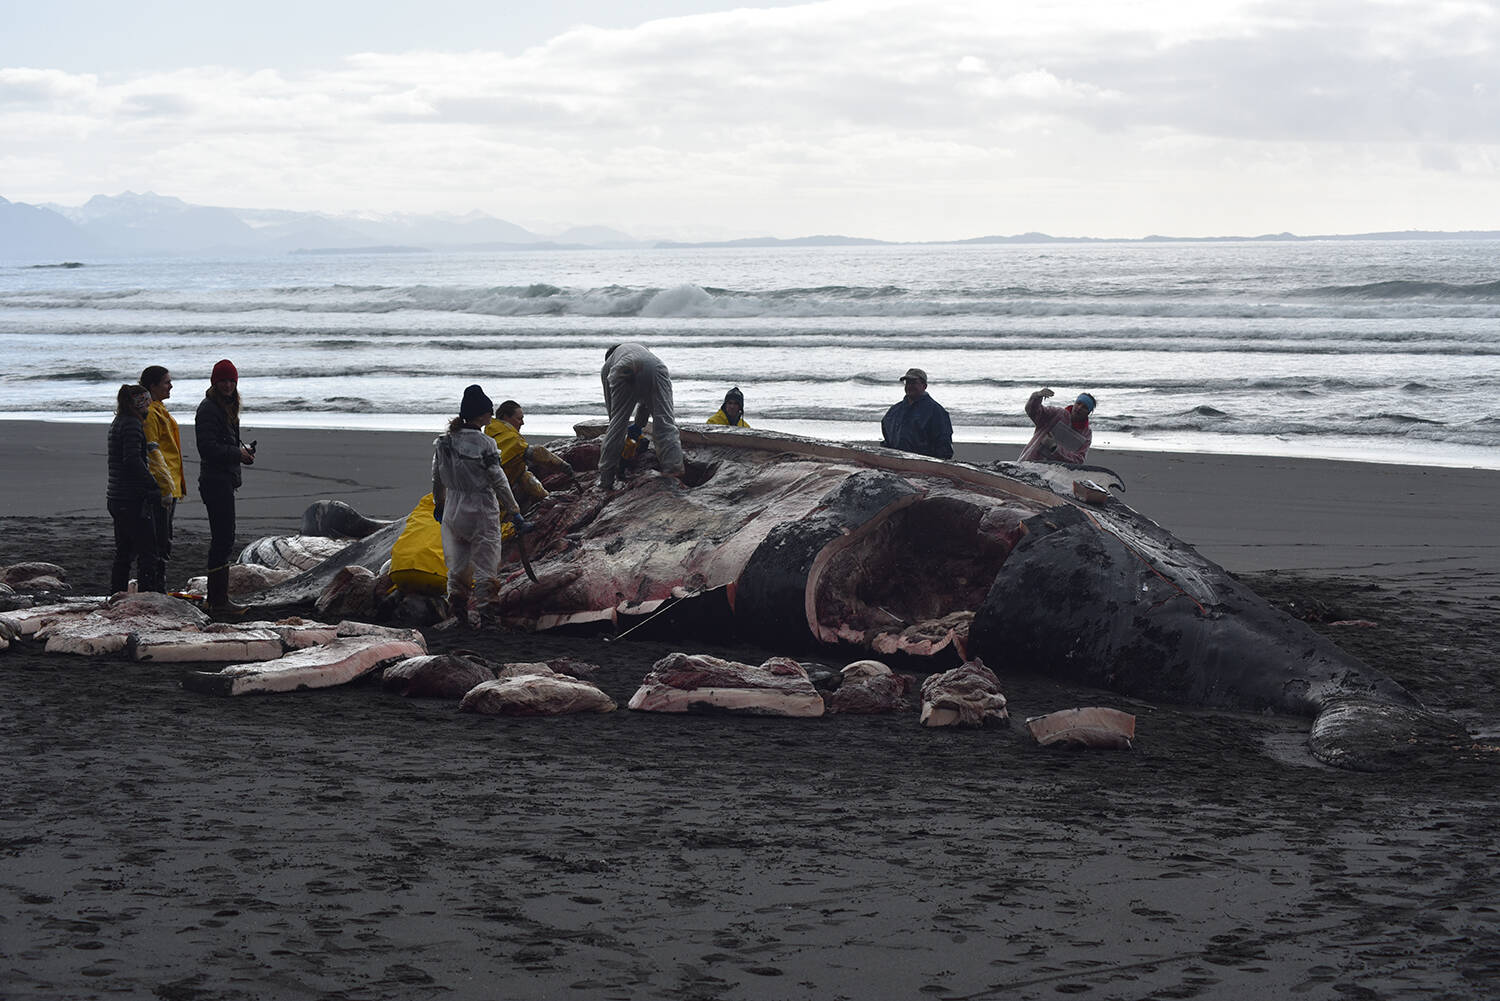 Coutesy photo / Alaska Marine Mammal Stranding Network
Volunteers with the Alaska Marine Mammal Stranding Network take samples from a beached humpback whale on Kuzof Island on Thursday, March 18, 2021.